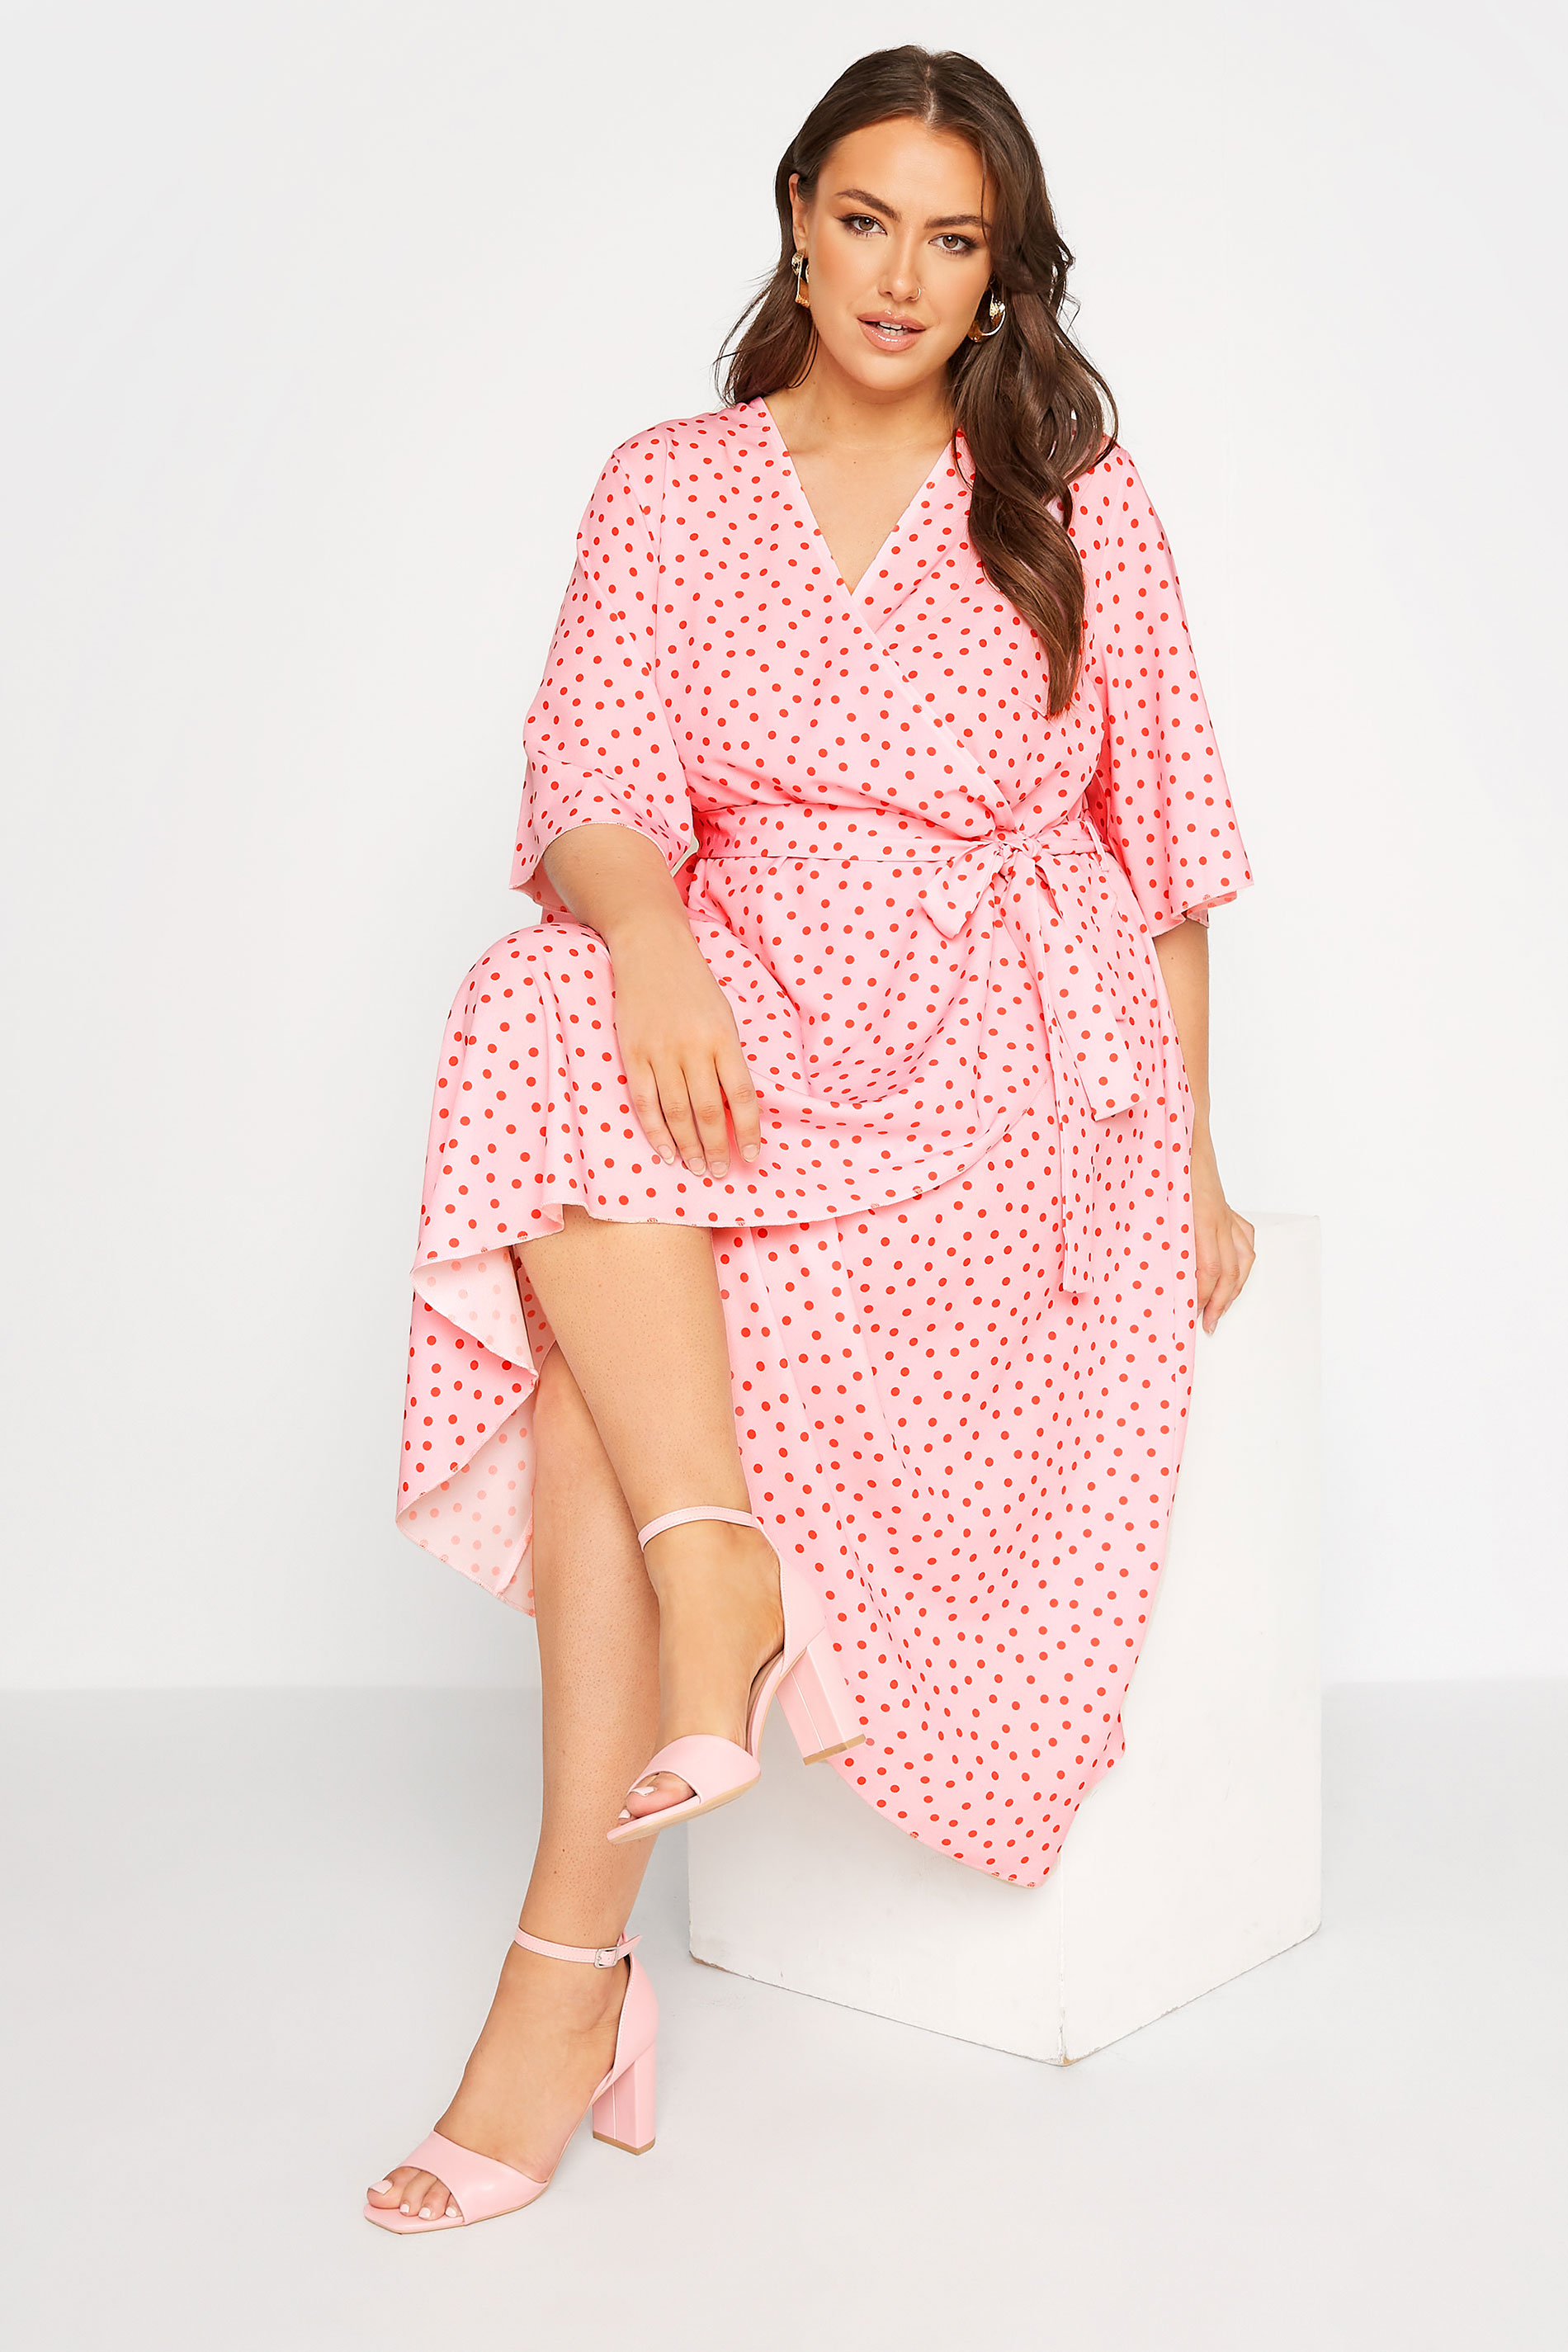 Robes Grande Taille Grande taille  Robes Portefeuilles | YOURS LONDON - Robe Rose à Pois Rouge Style Portefeuille - TP22456